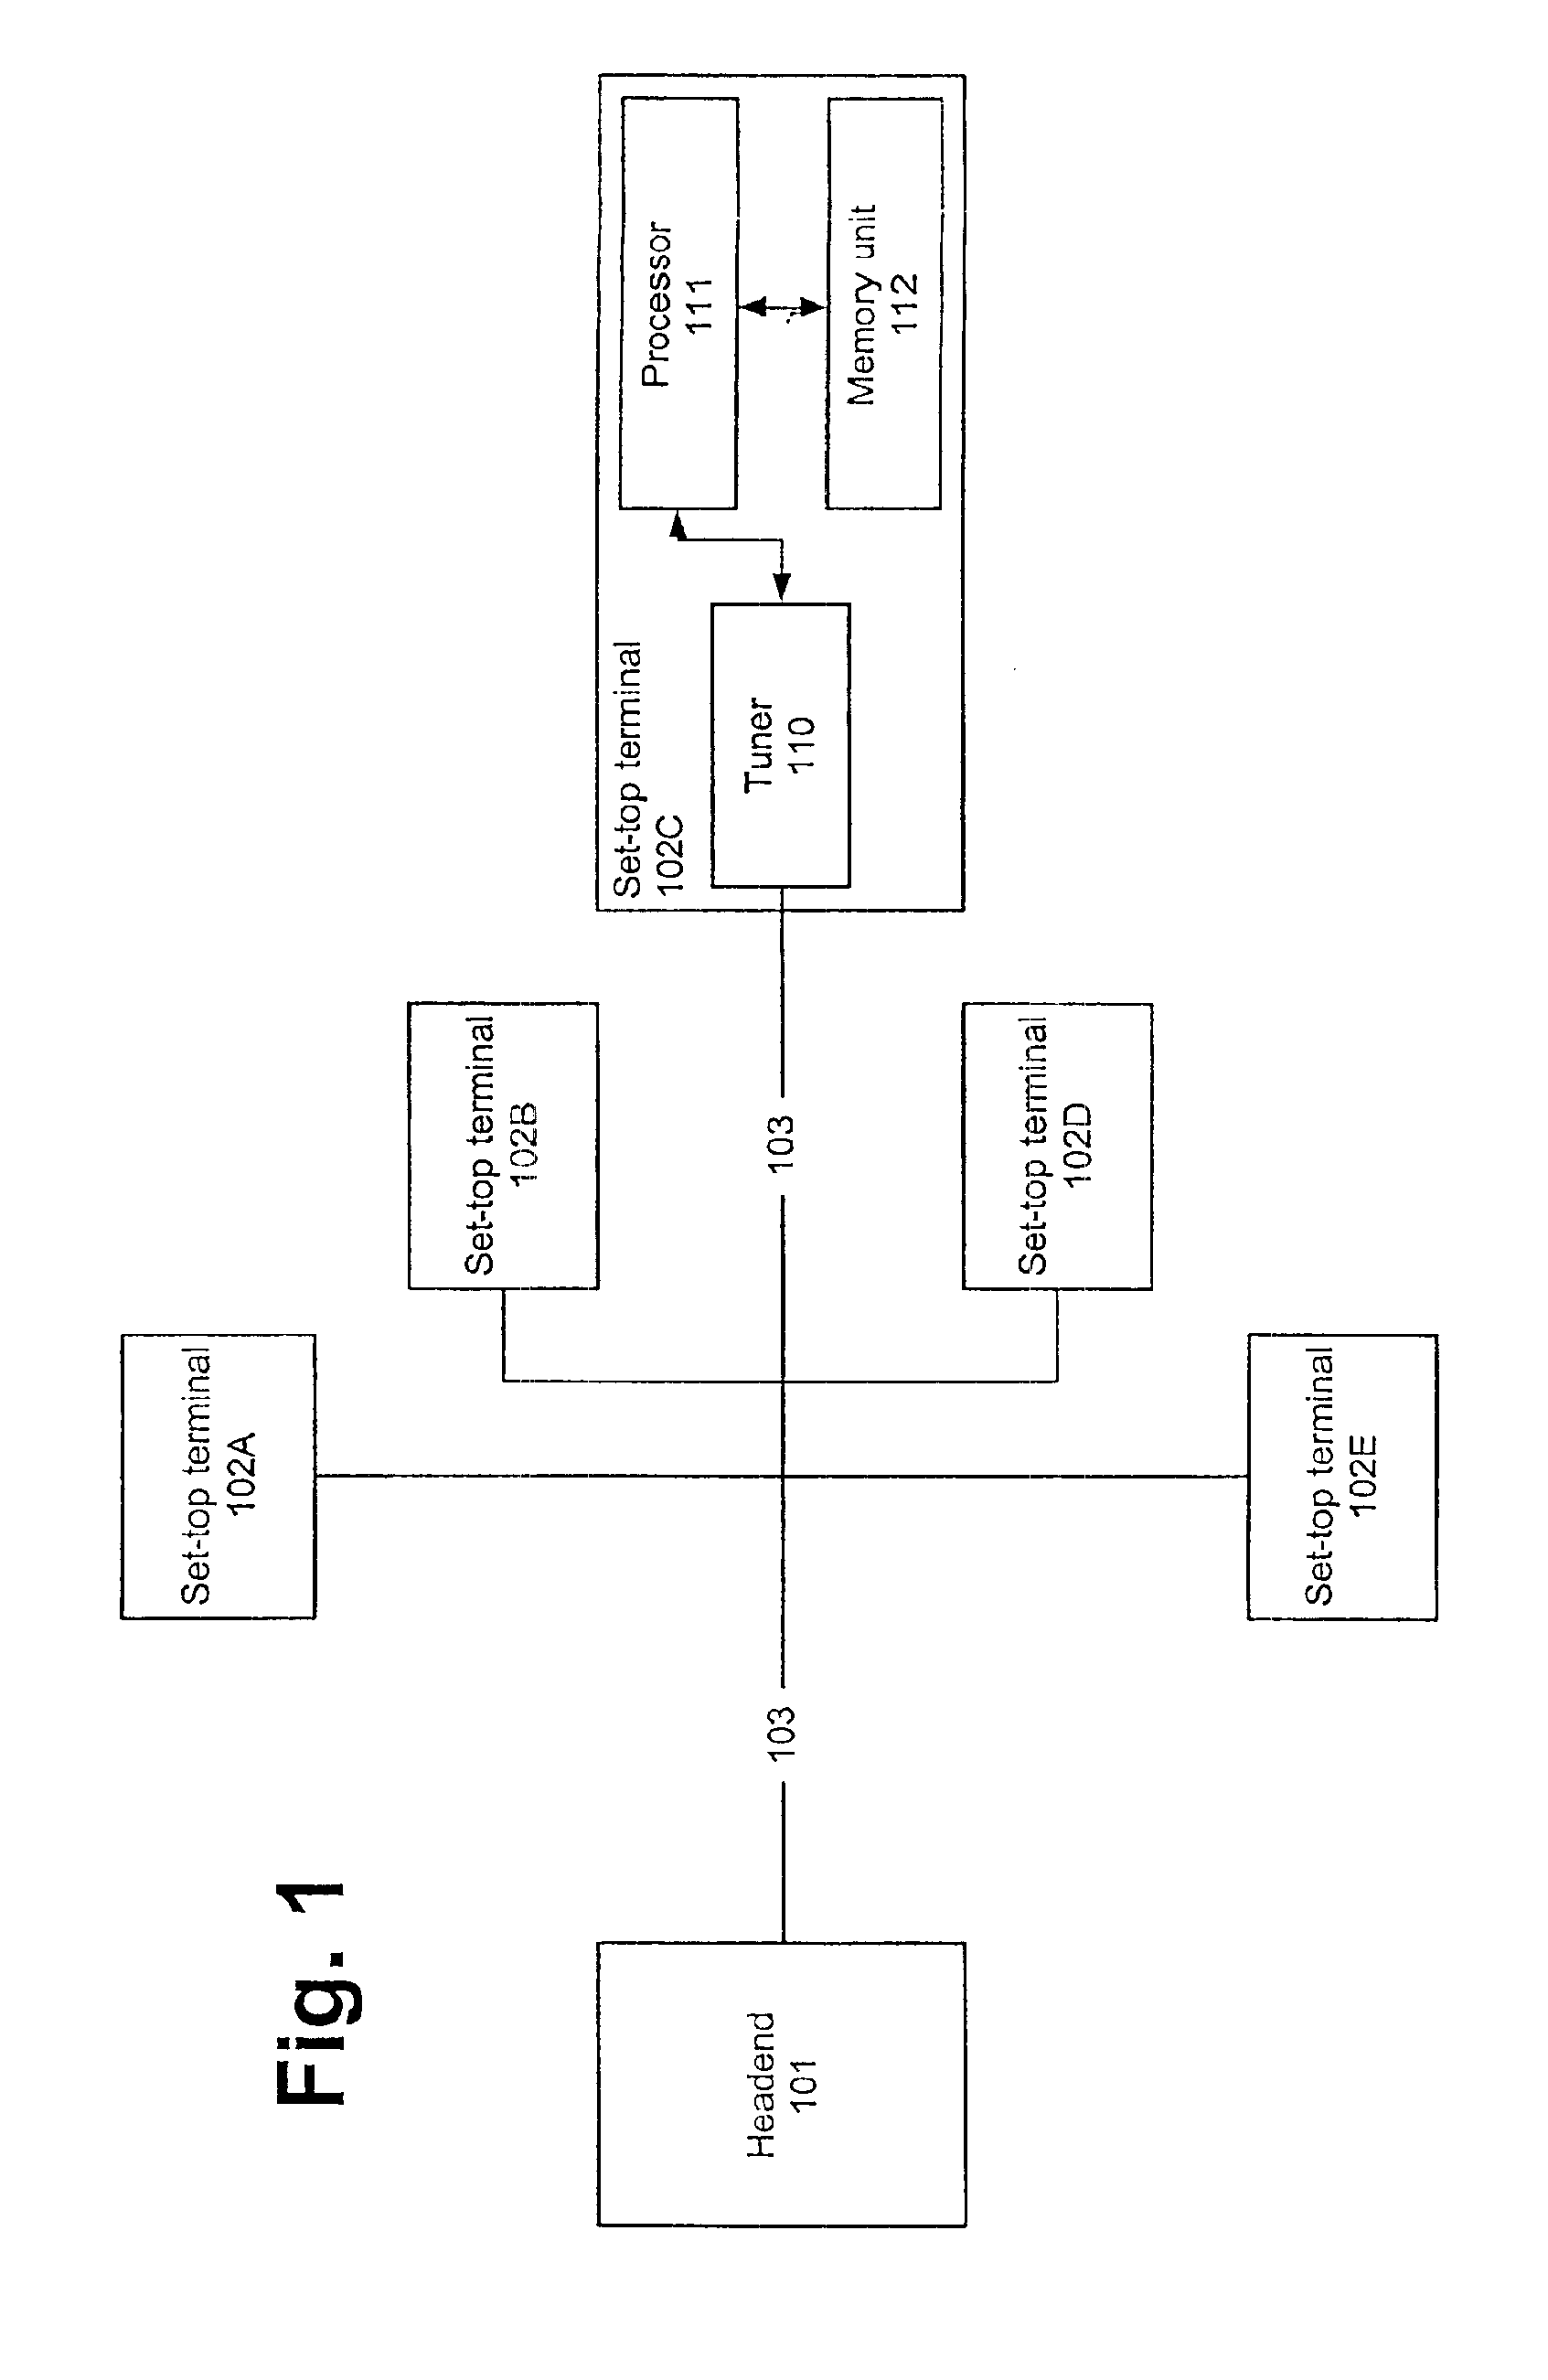 Method and system for directing the download of software and firmware objects over a network such as a cable television system